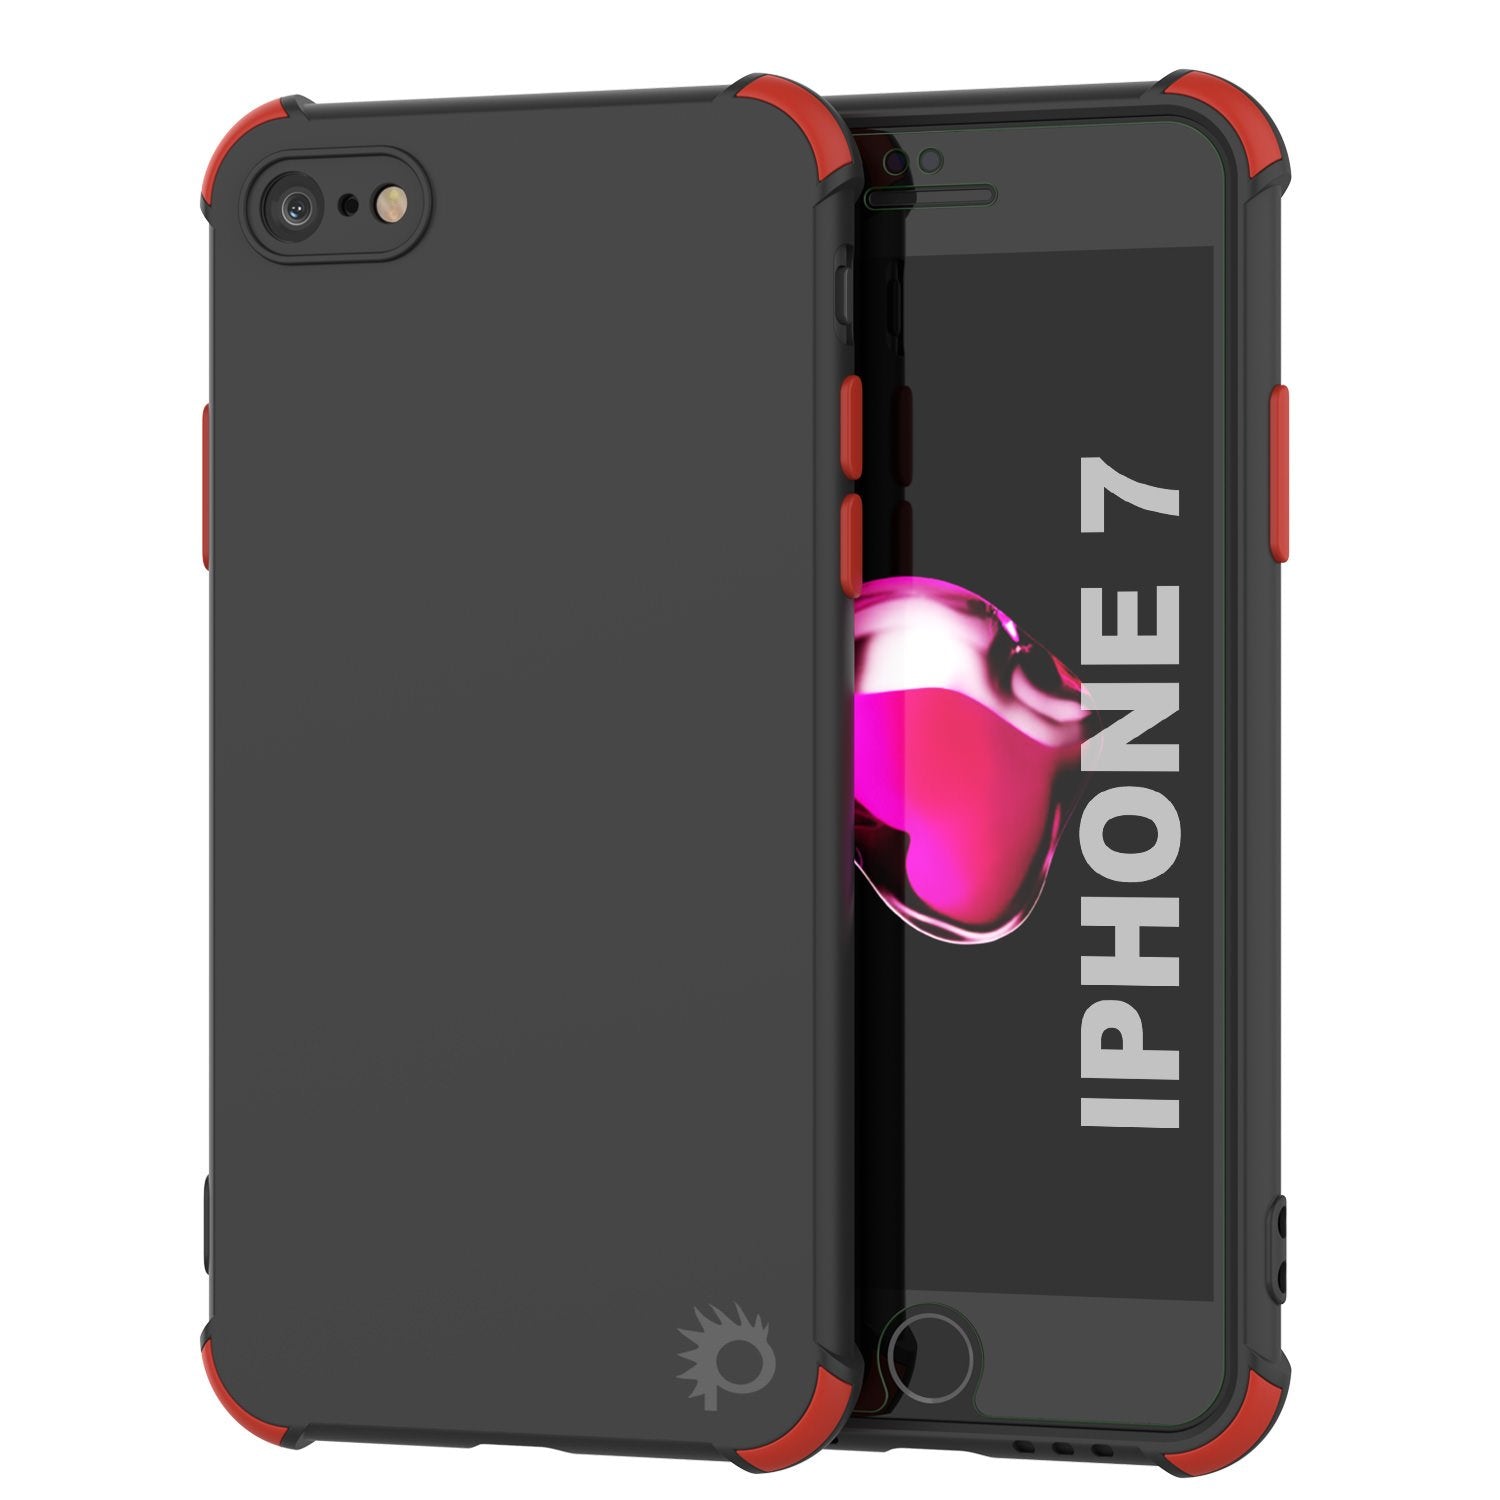 Punkcase Protective & Lightweight TPU Case [Sunshine Series] for iPhone 7 [Black]